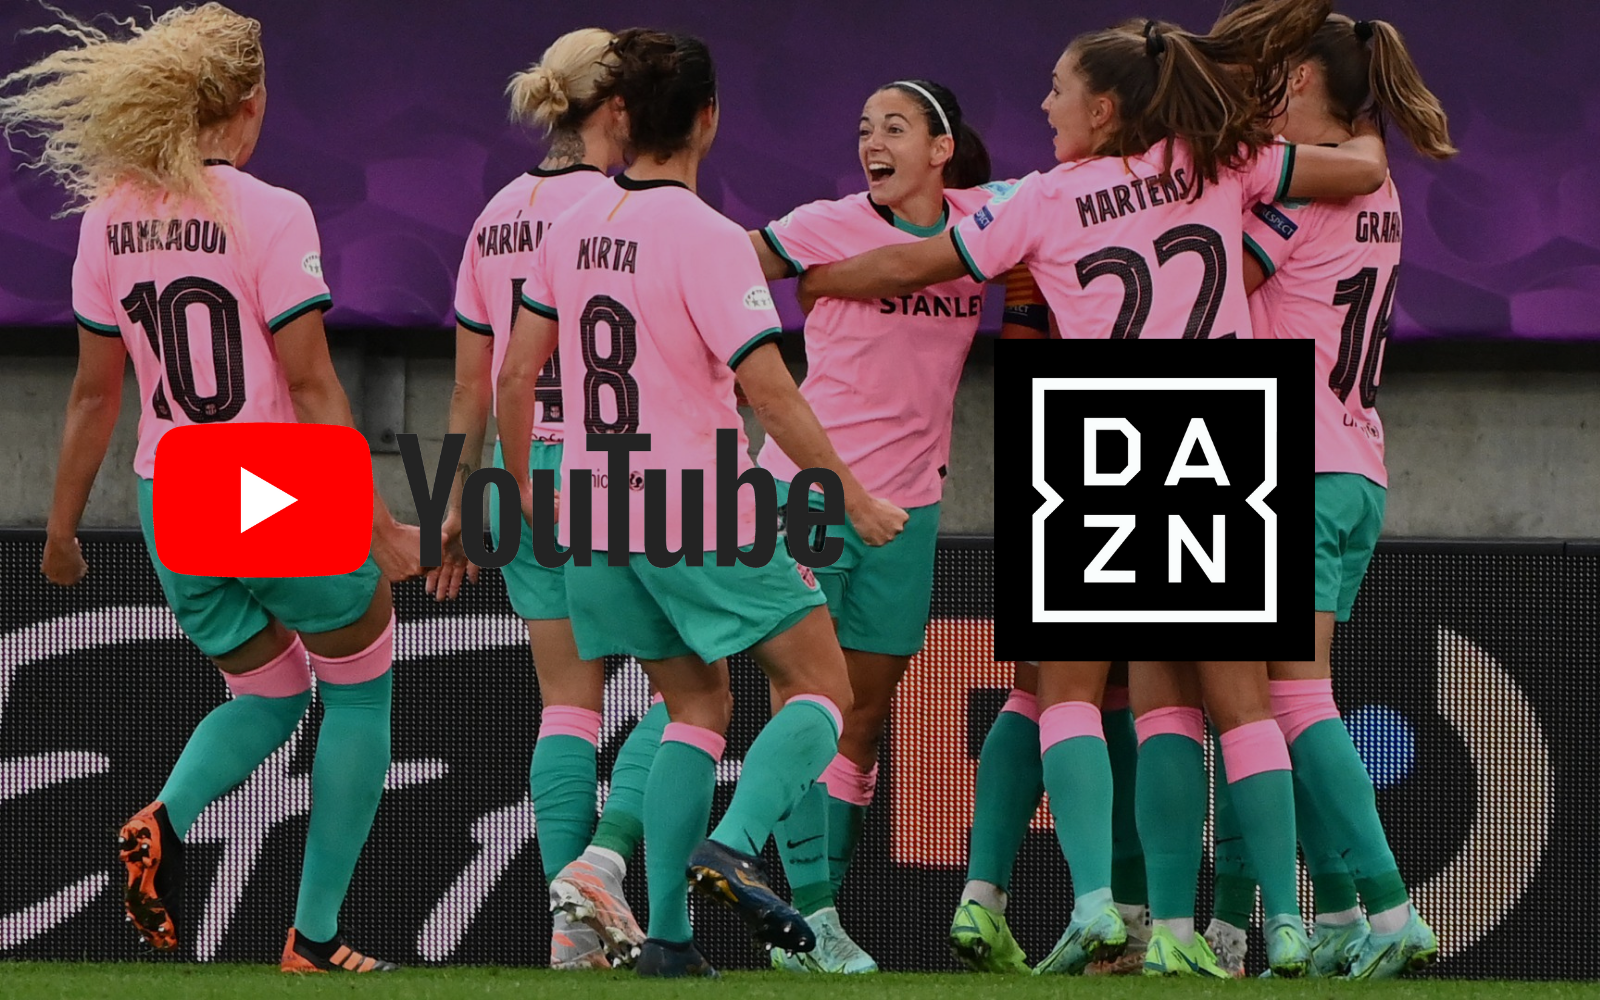 Women's Champions' League Free to Air on DAZN - Sport for Business